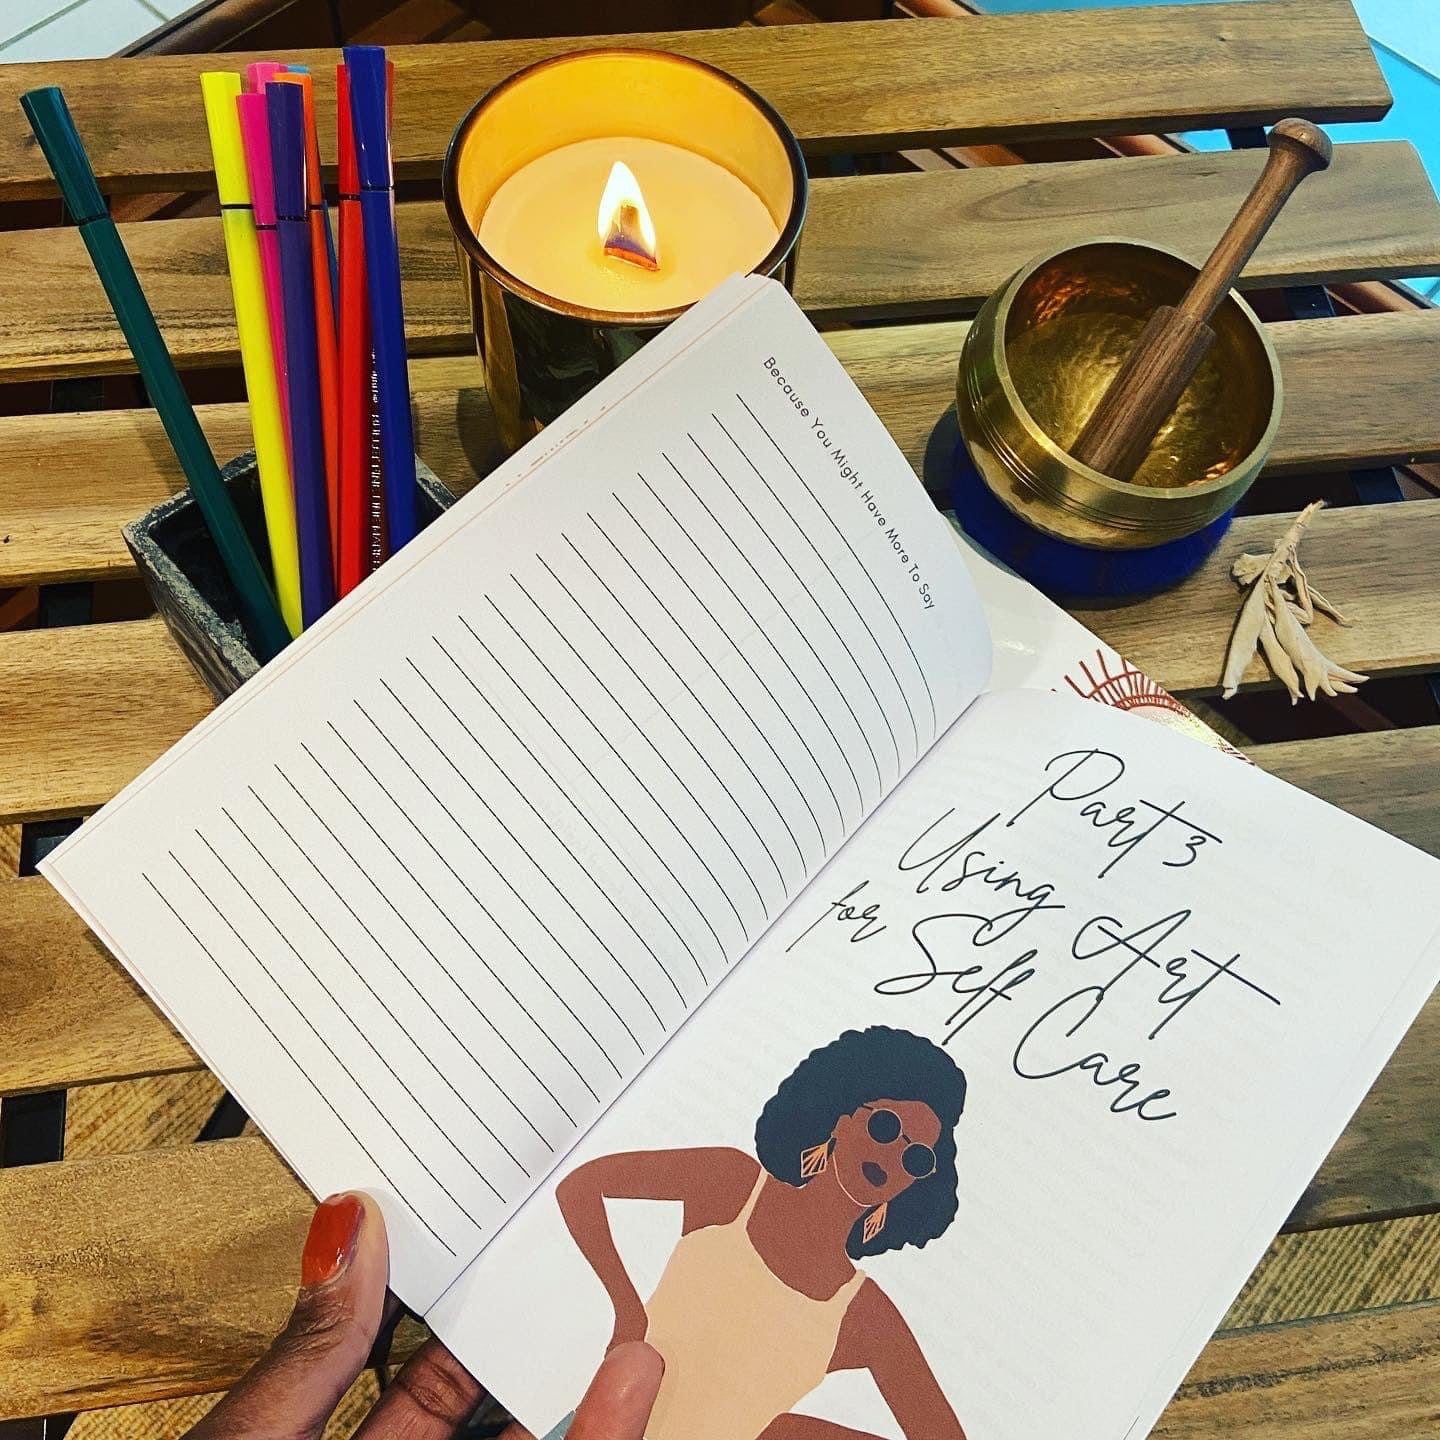 The Art of Self-Care Guided Creative Journal